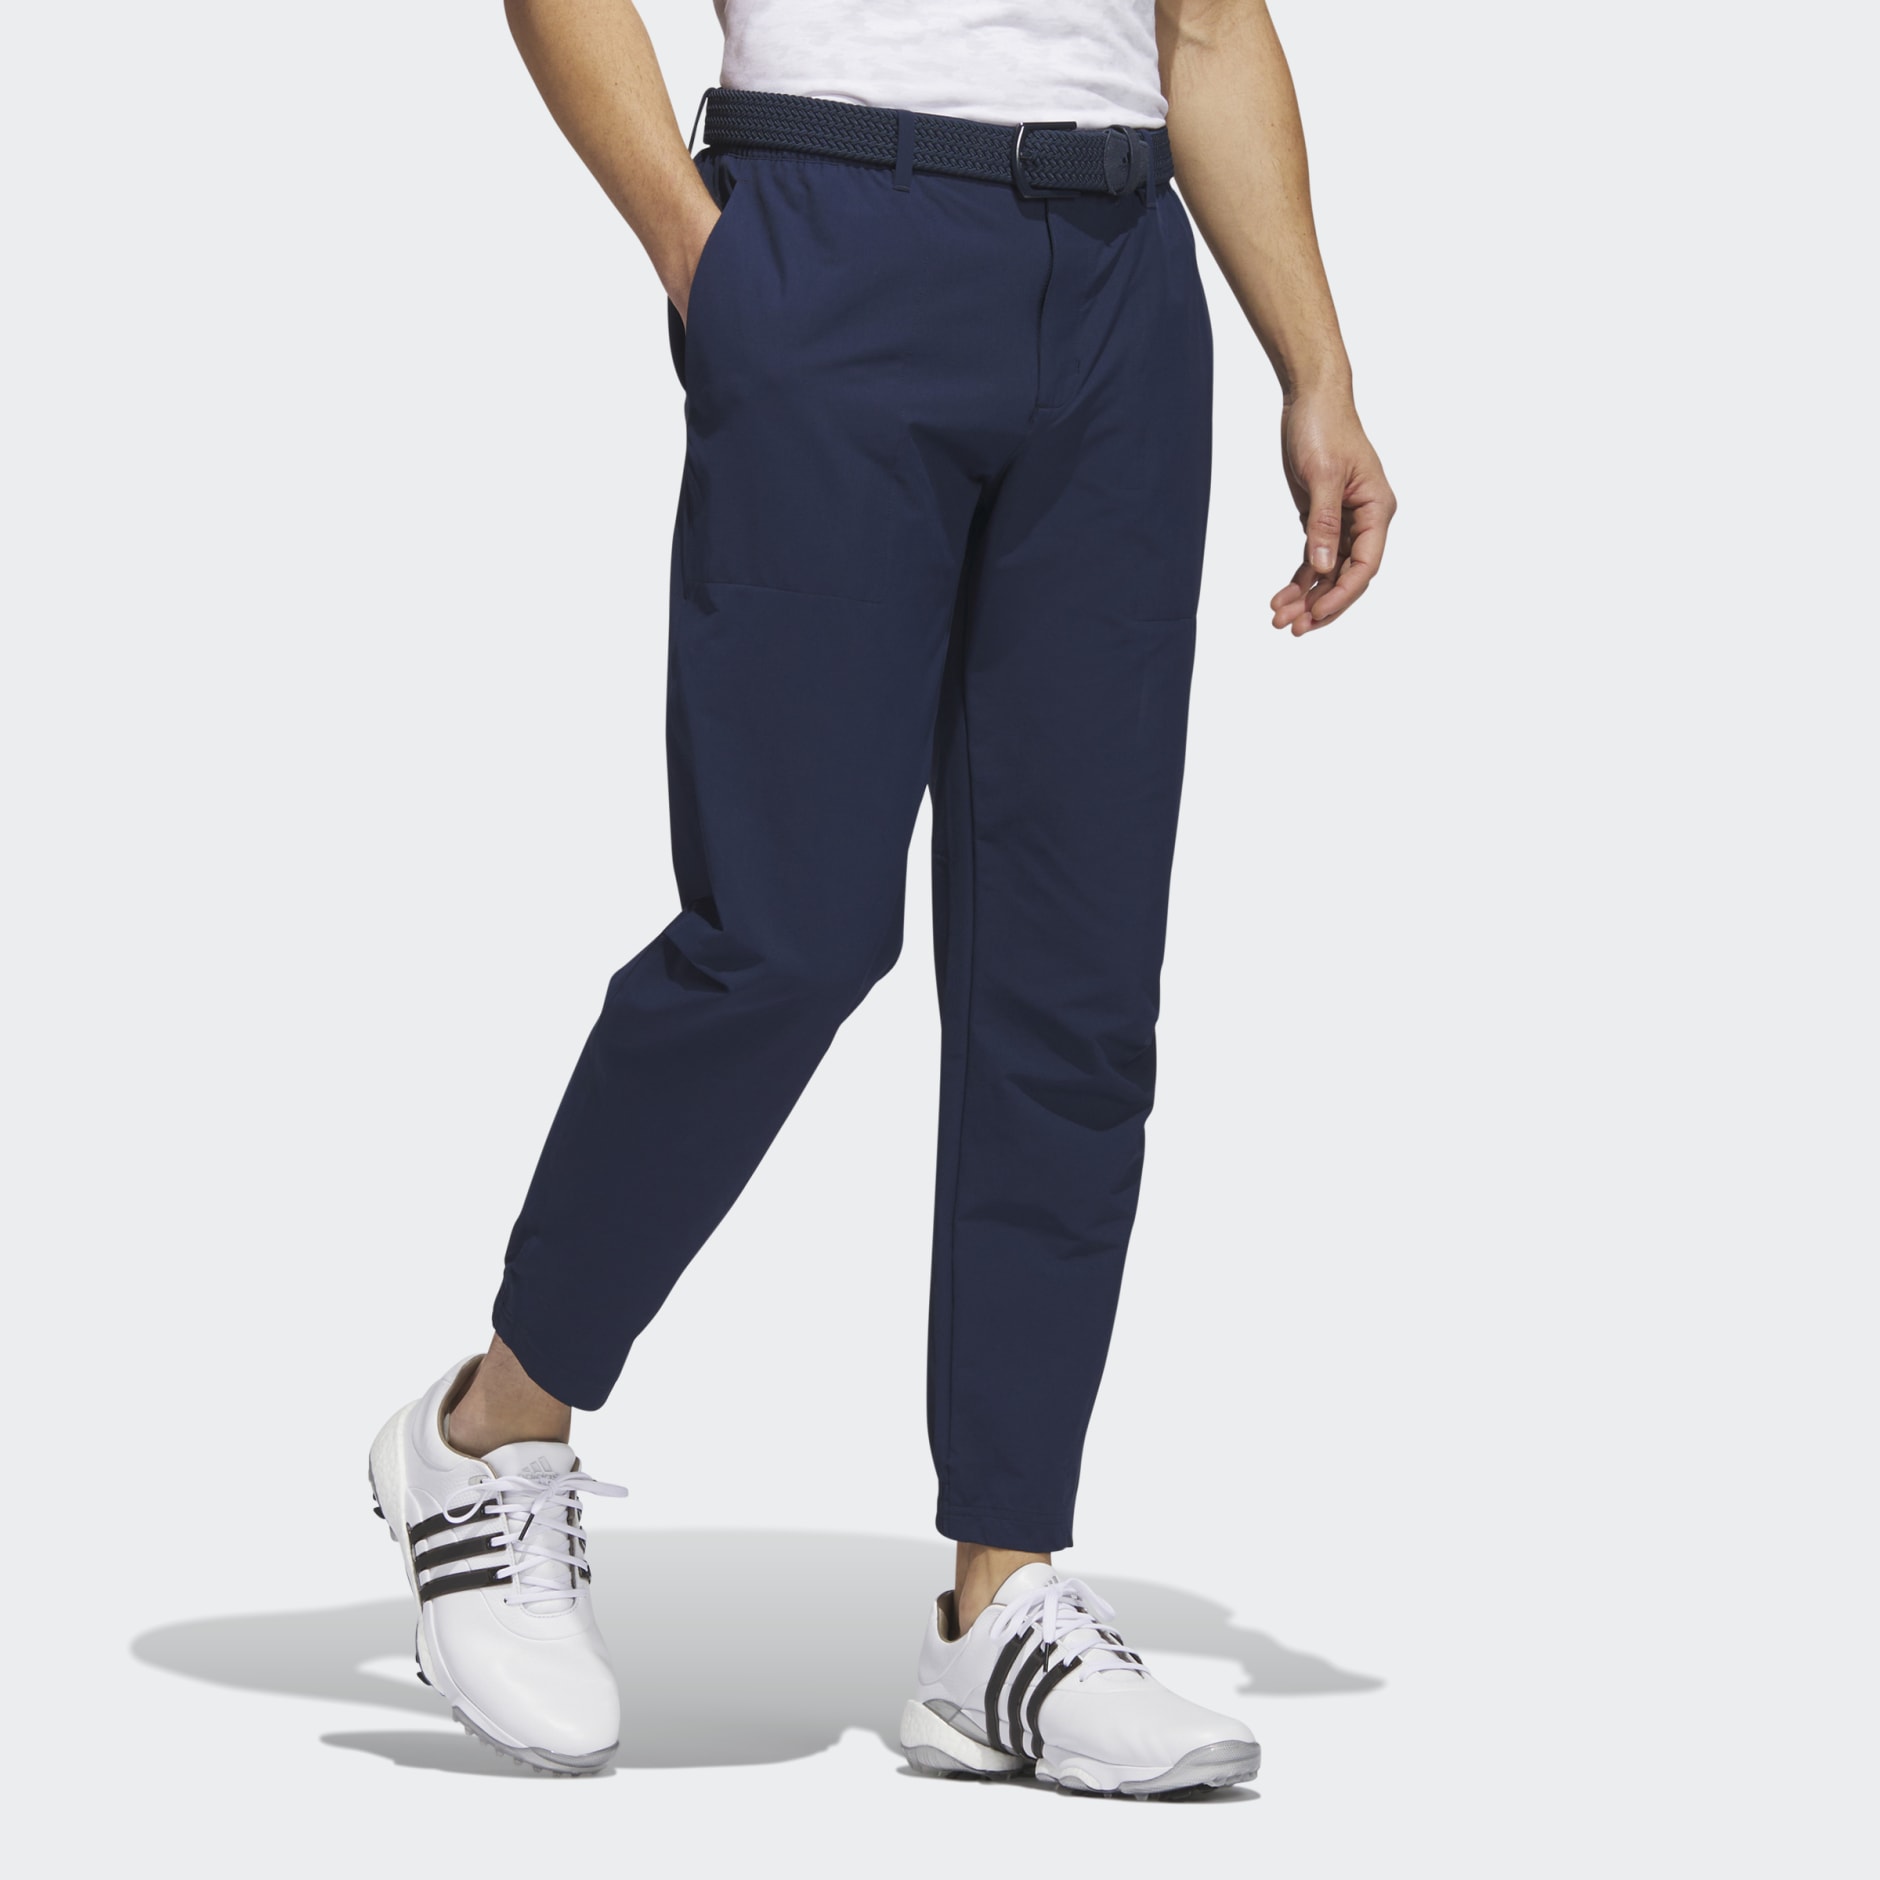 adidas Golf Trousers - Primegreen Commuter Pant - Crew Navy AW22